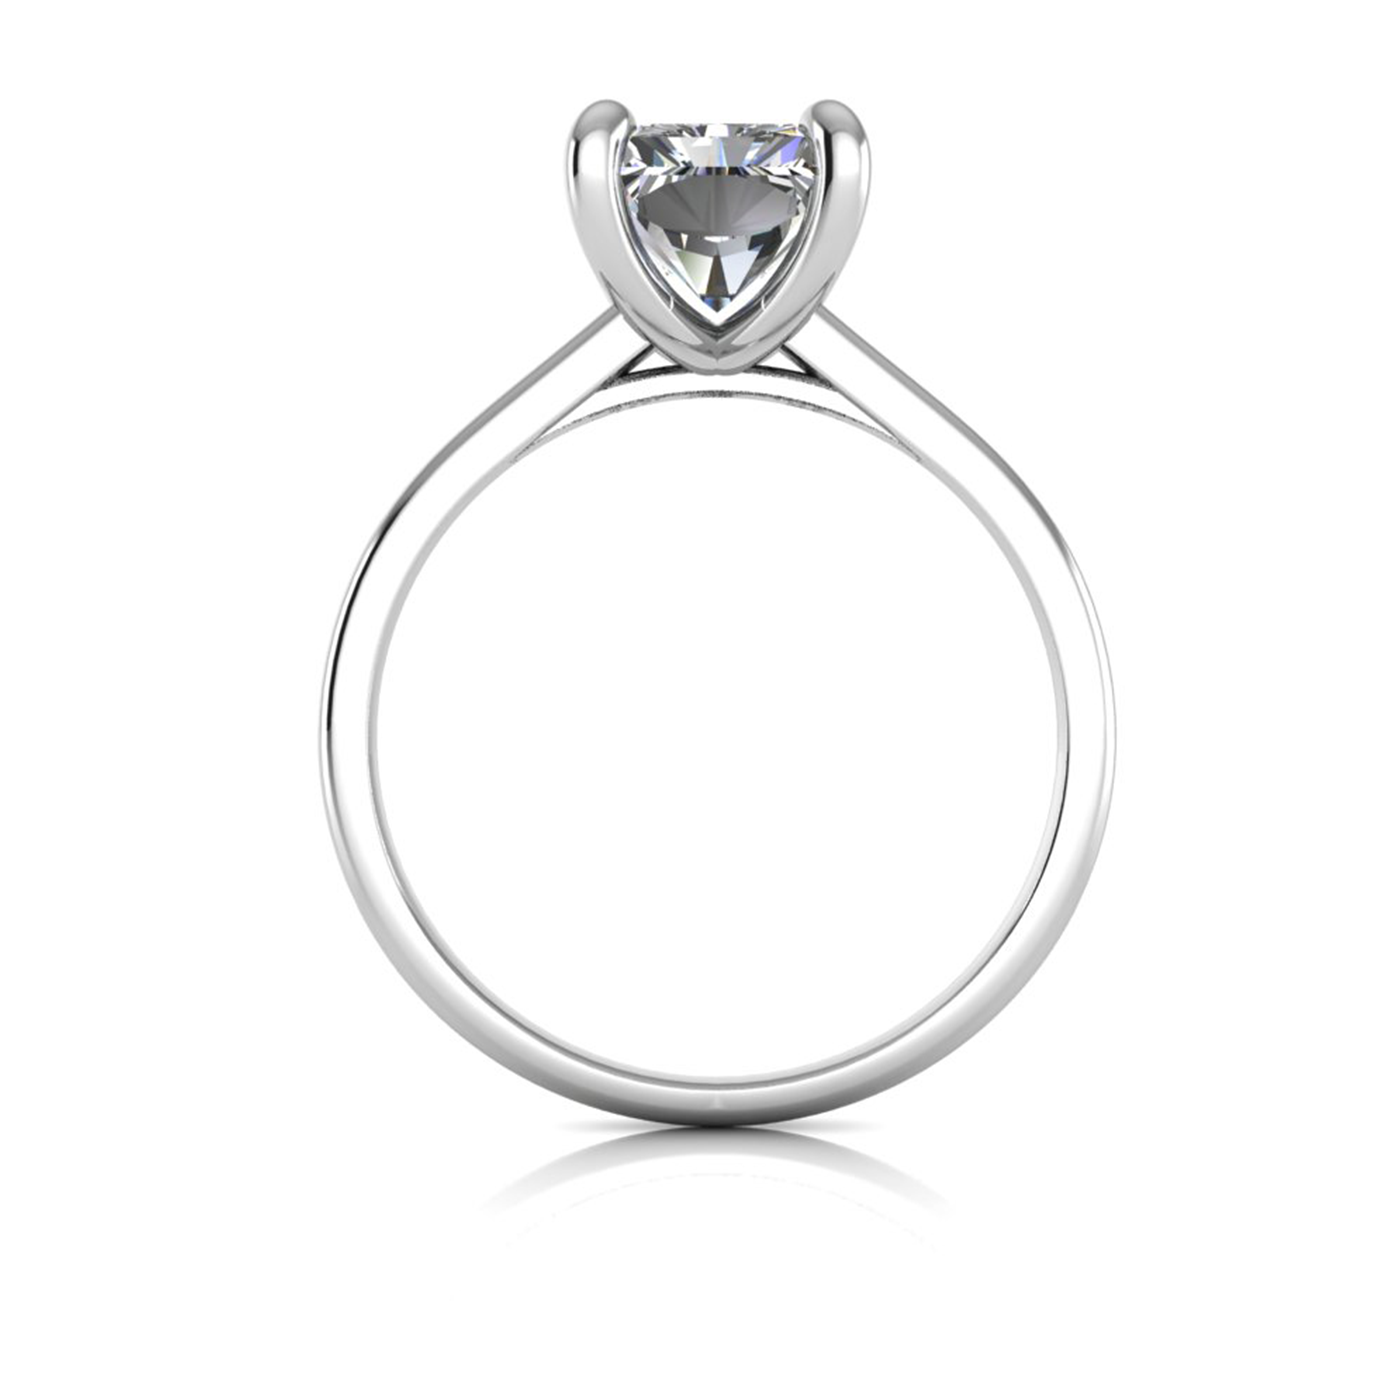 18k white gold  2,50 ct 4 prongs solitaire radiant cut diamond engagement ring with whisper thin band